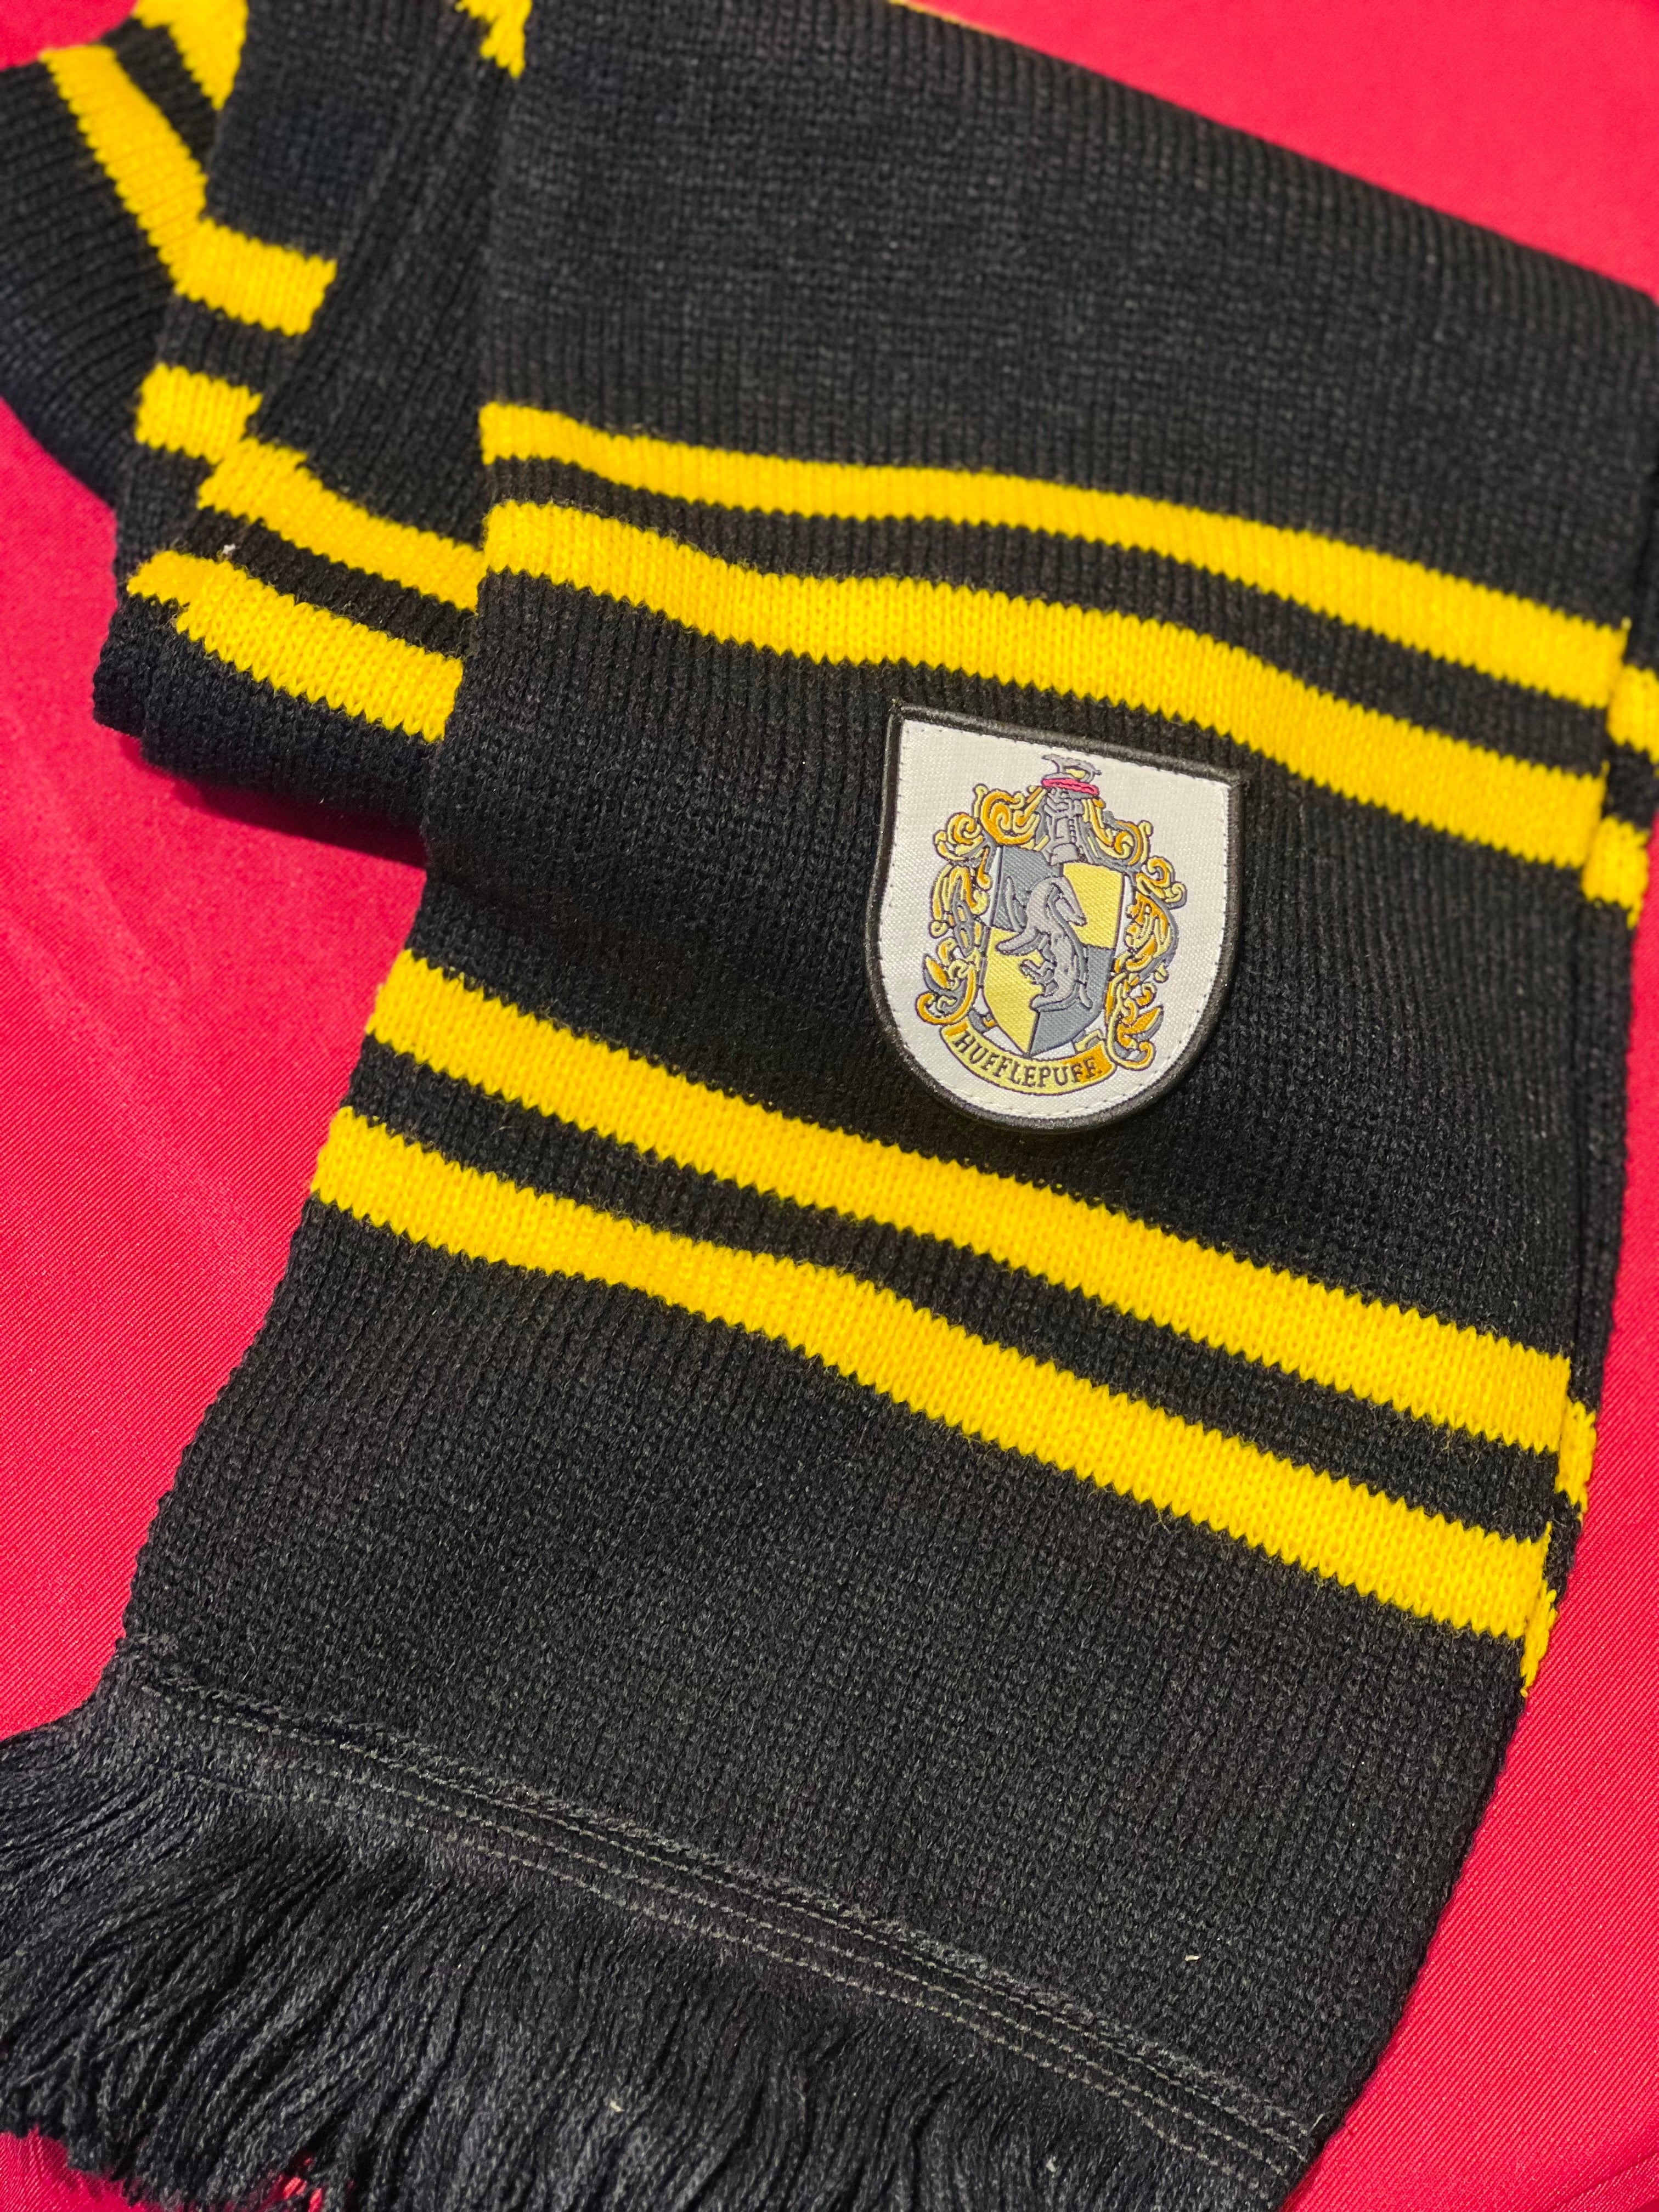 Hufflepuff's scarf - analogue of the film